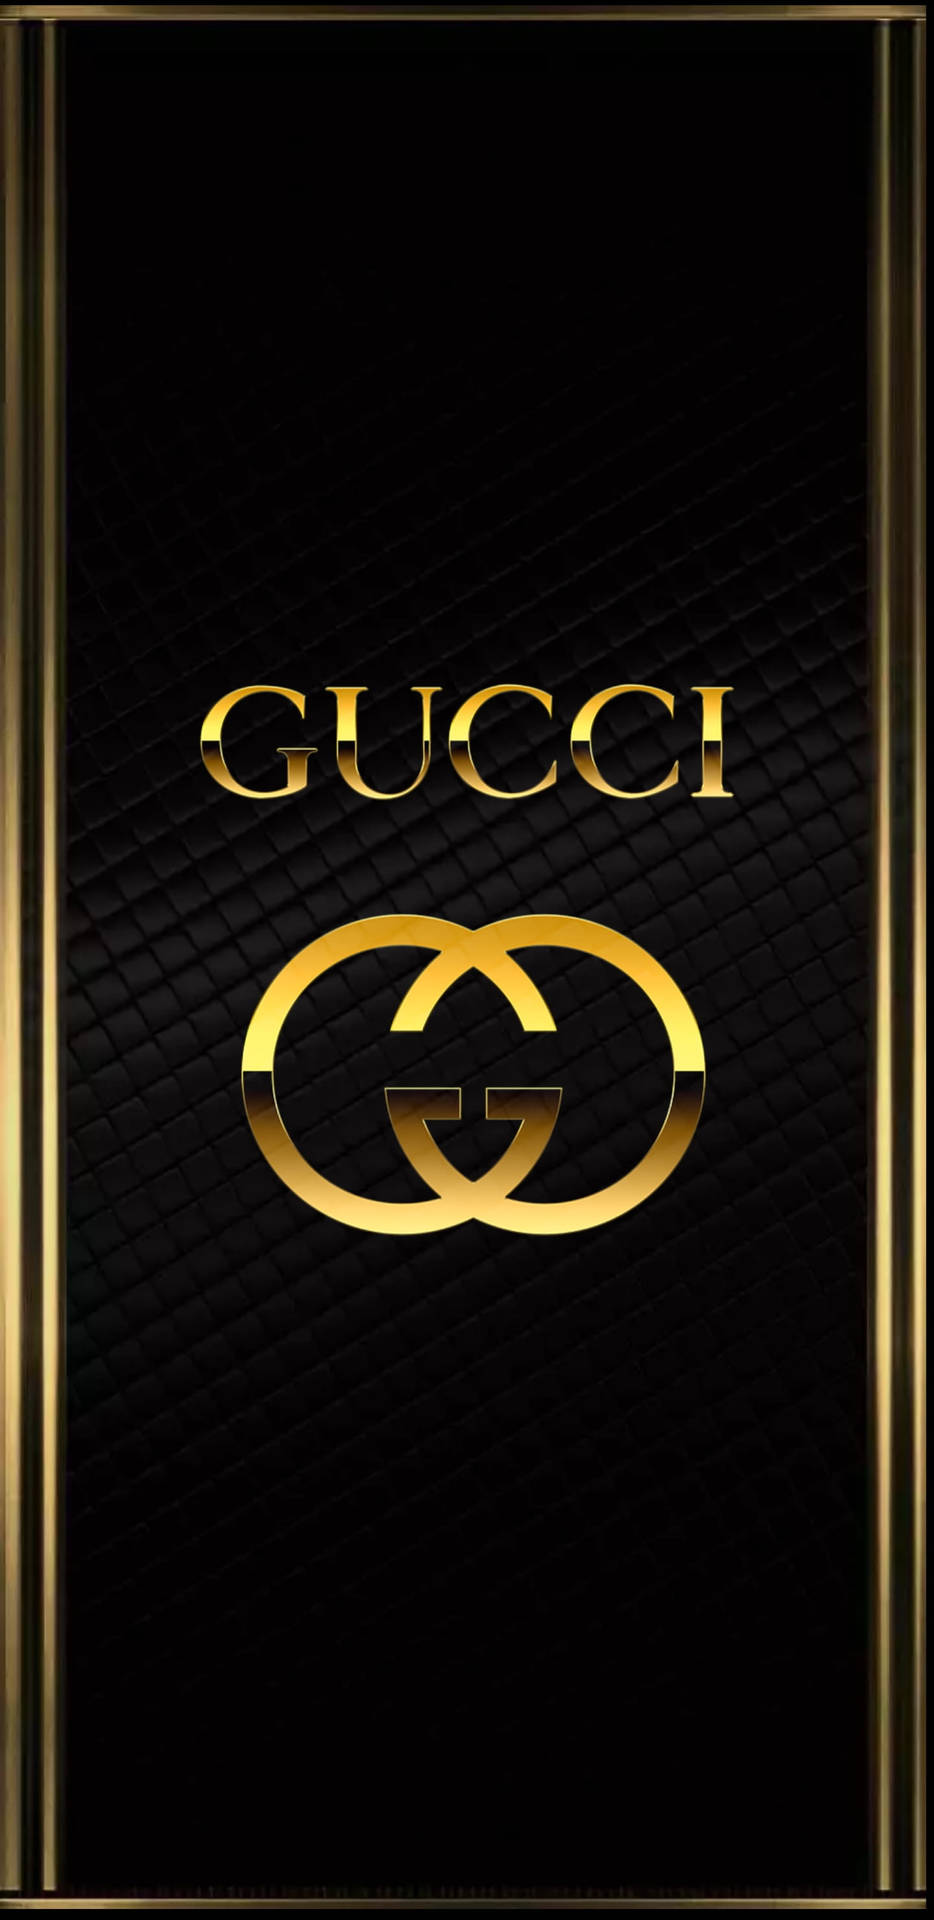 Free Gucci iPhone Wallpaper Downloads, Gucci iPhone Wallpaper for FREE